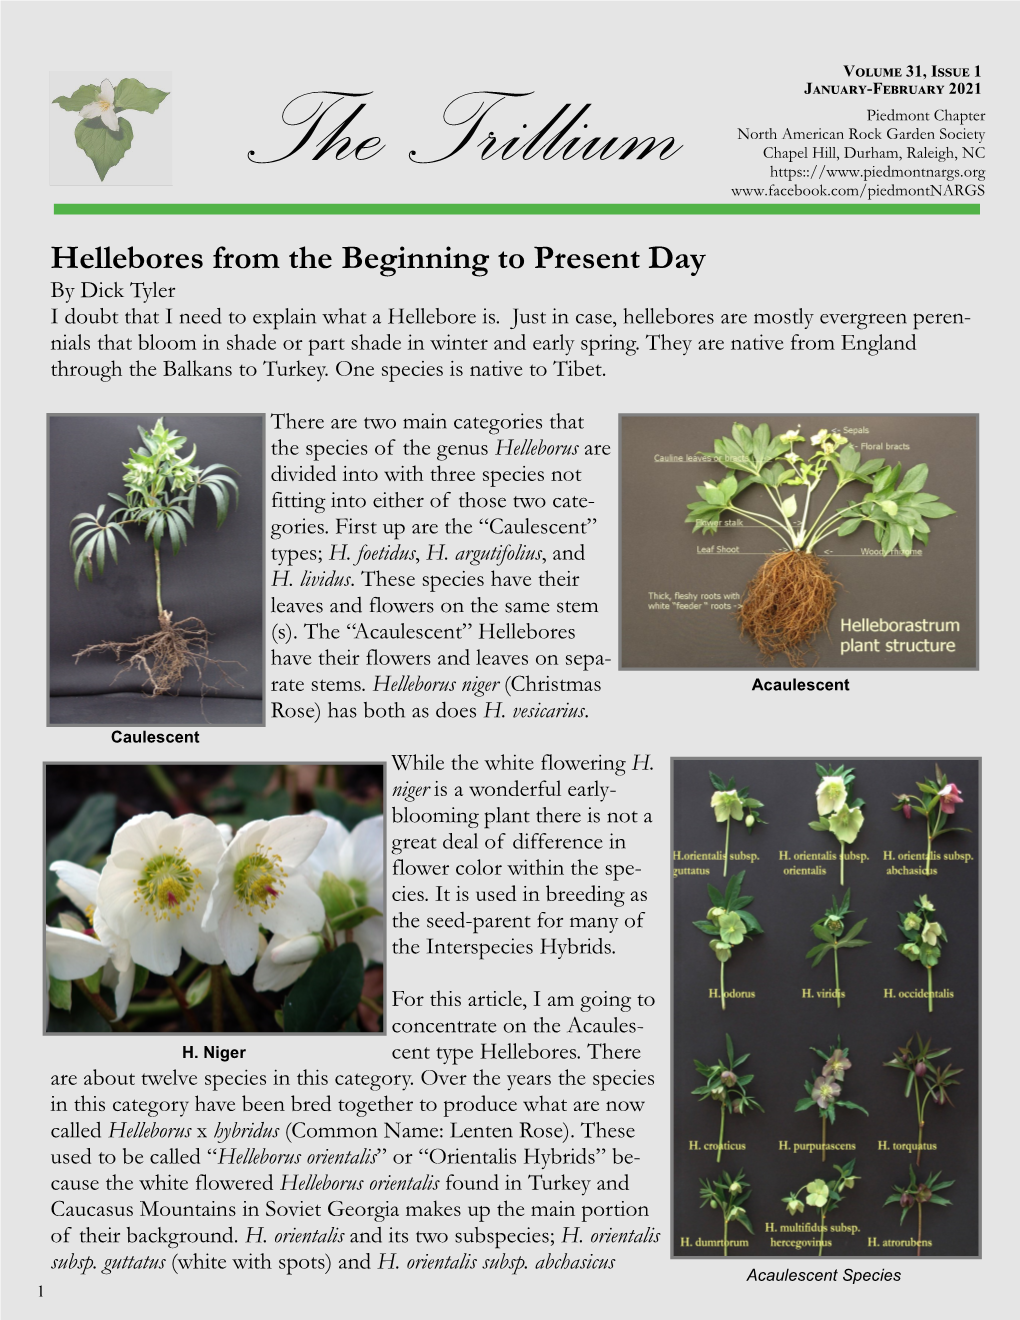 Hellebores from the Beginning to Present Day by Dick Tyler I Doubt That I Need to Explain What a Hellebore Is